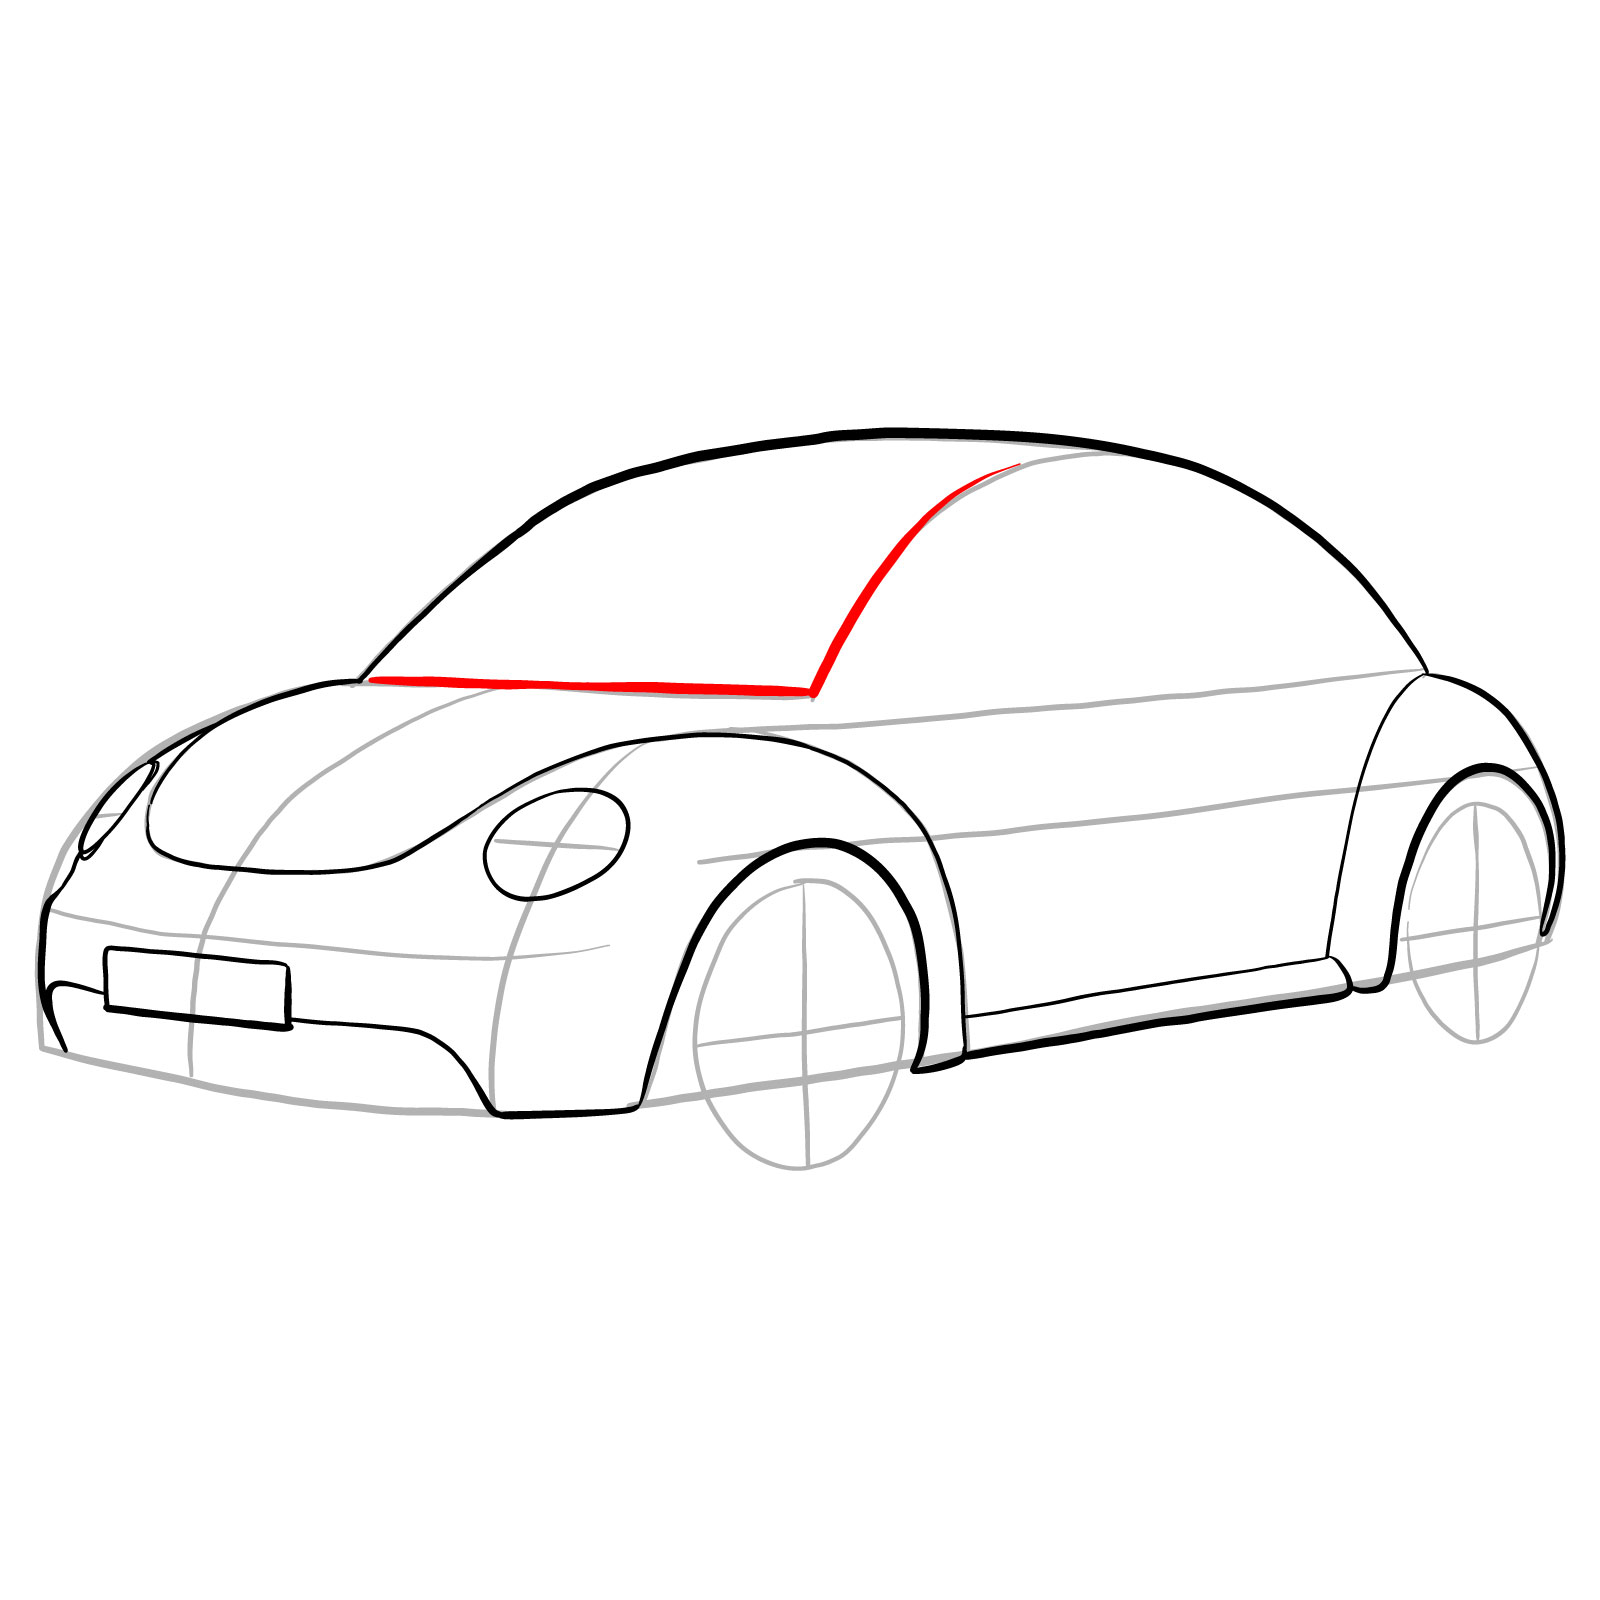 How to draw Volkswagen New Beetle - step 14